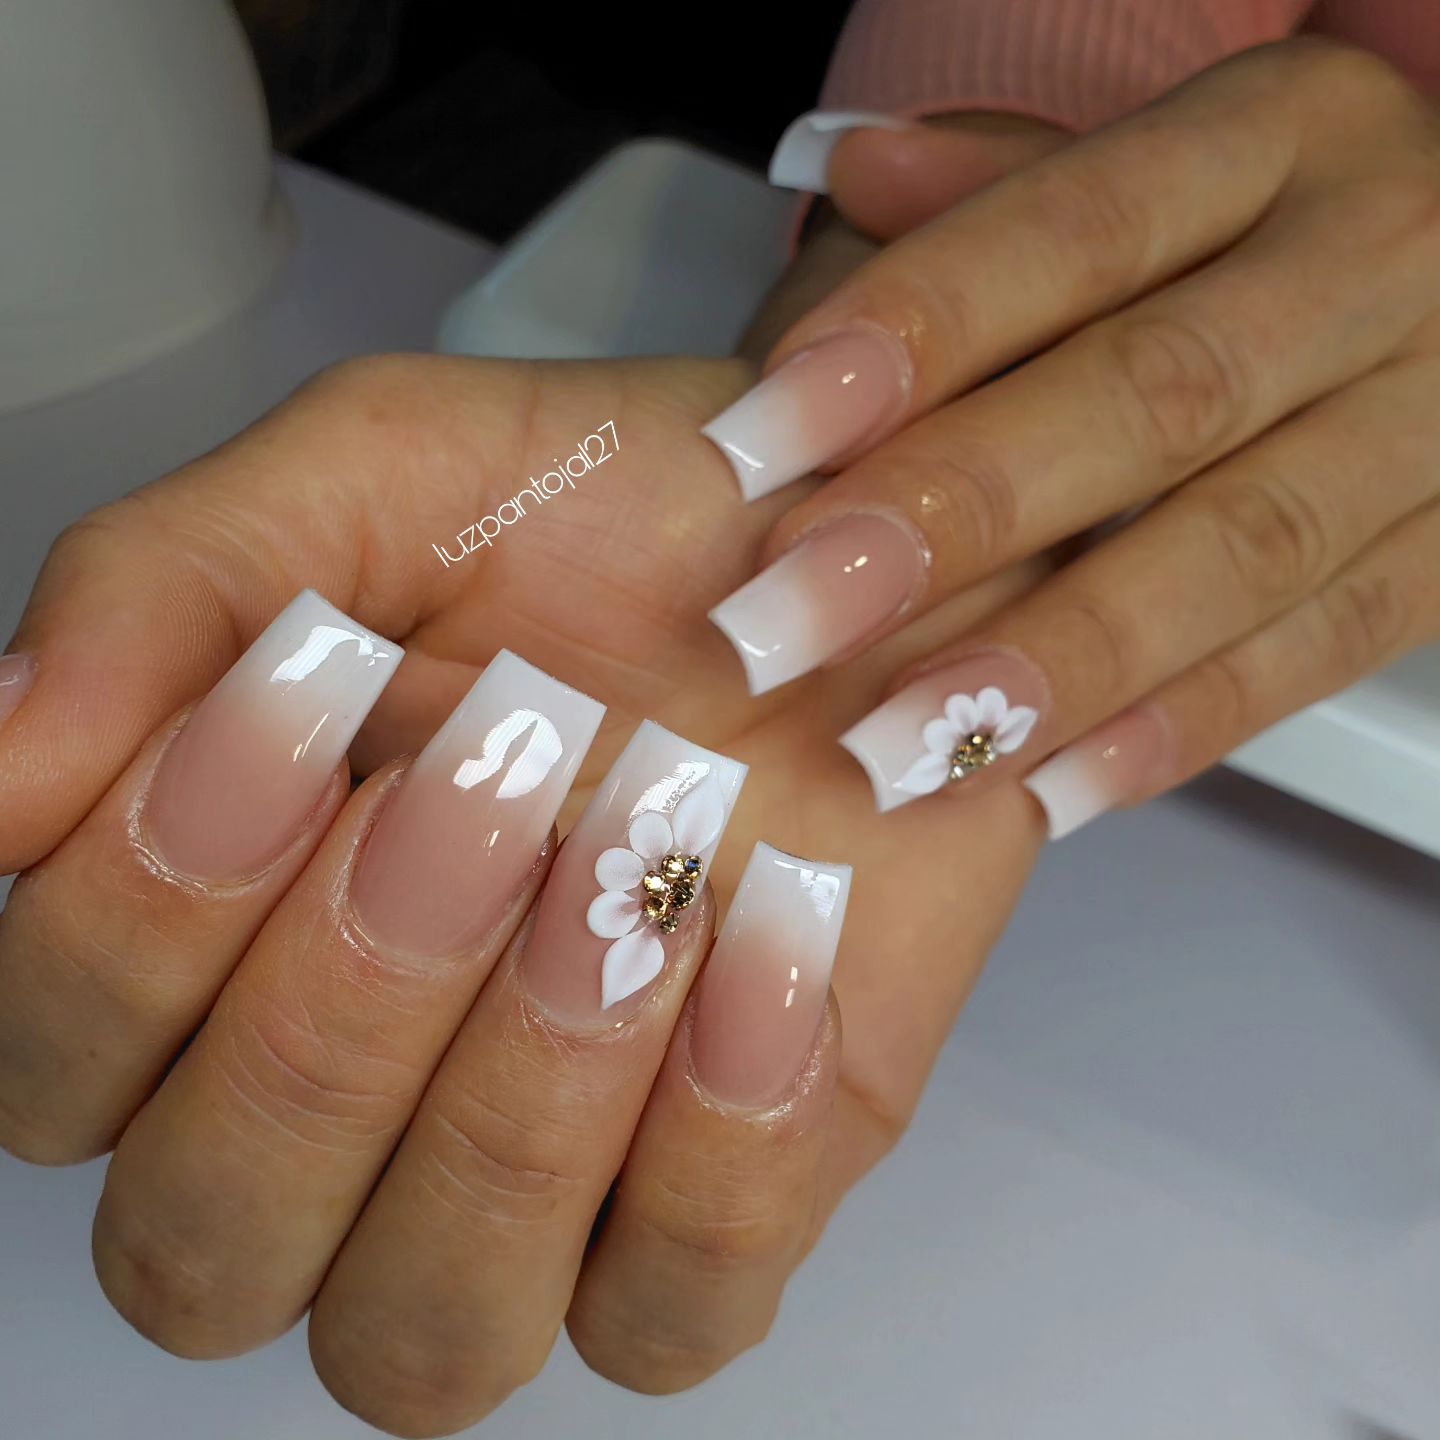 Elegant Ombre French Manicure with Floral Accents